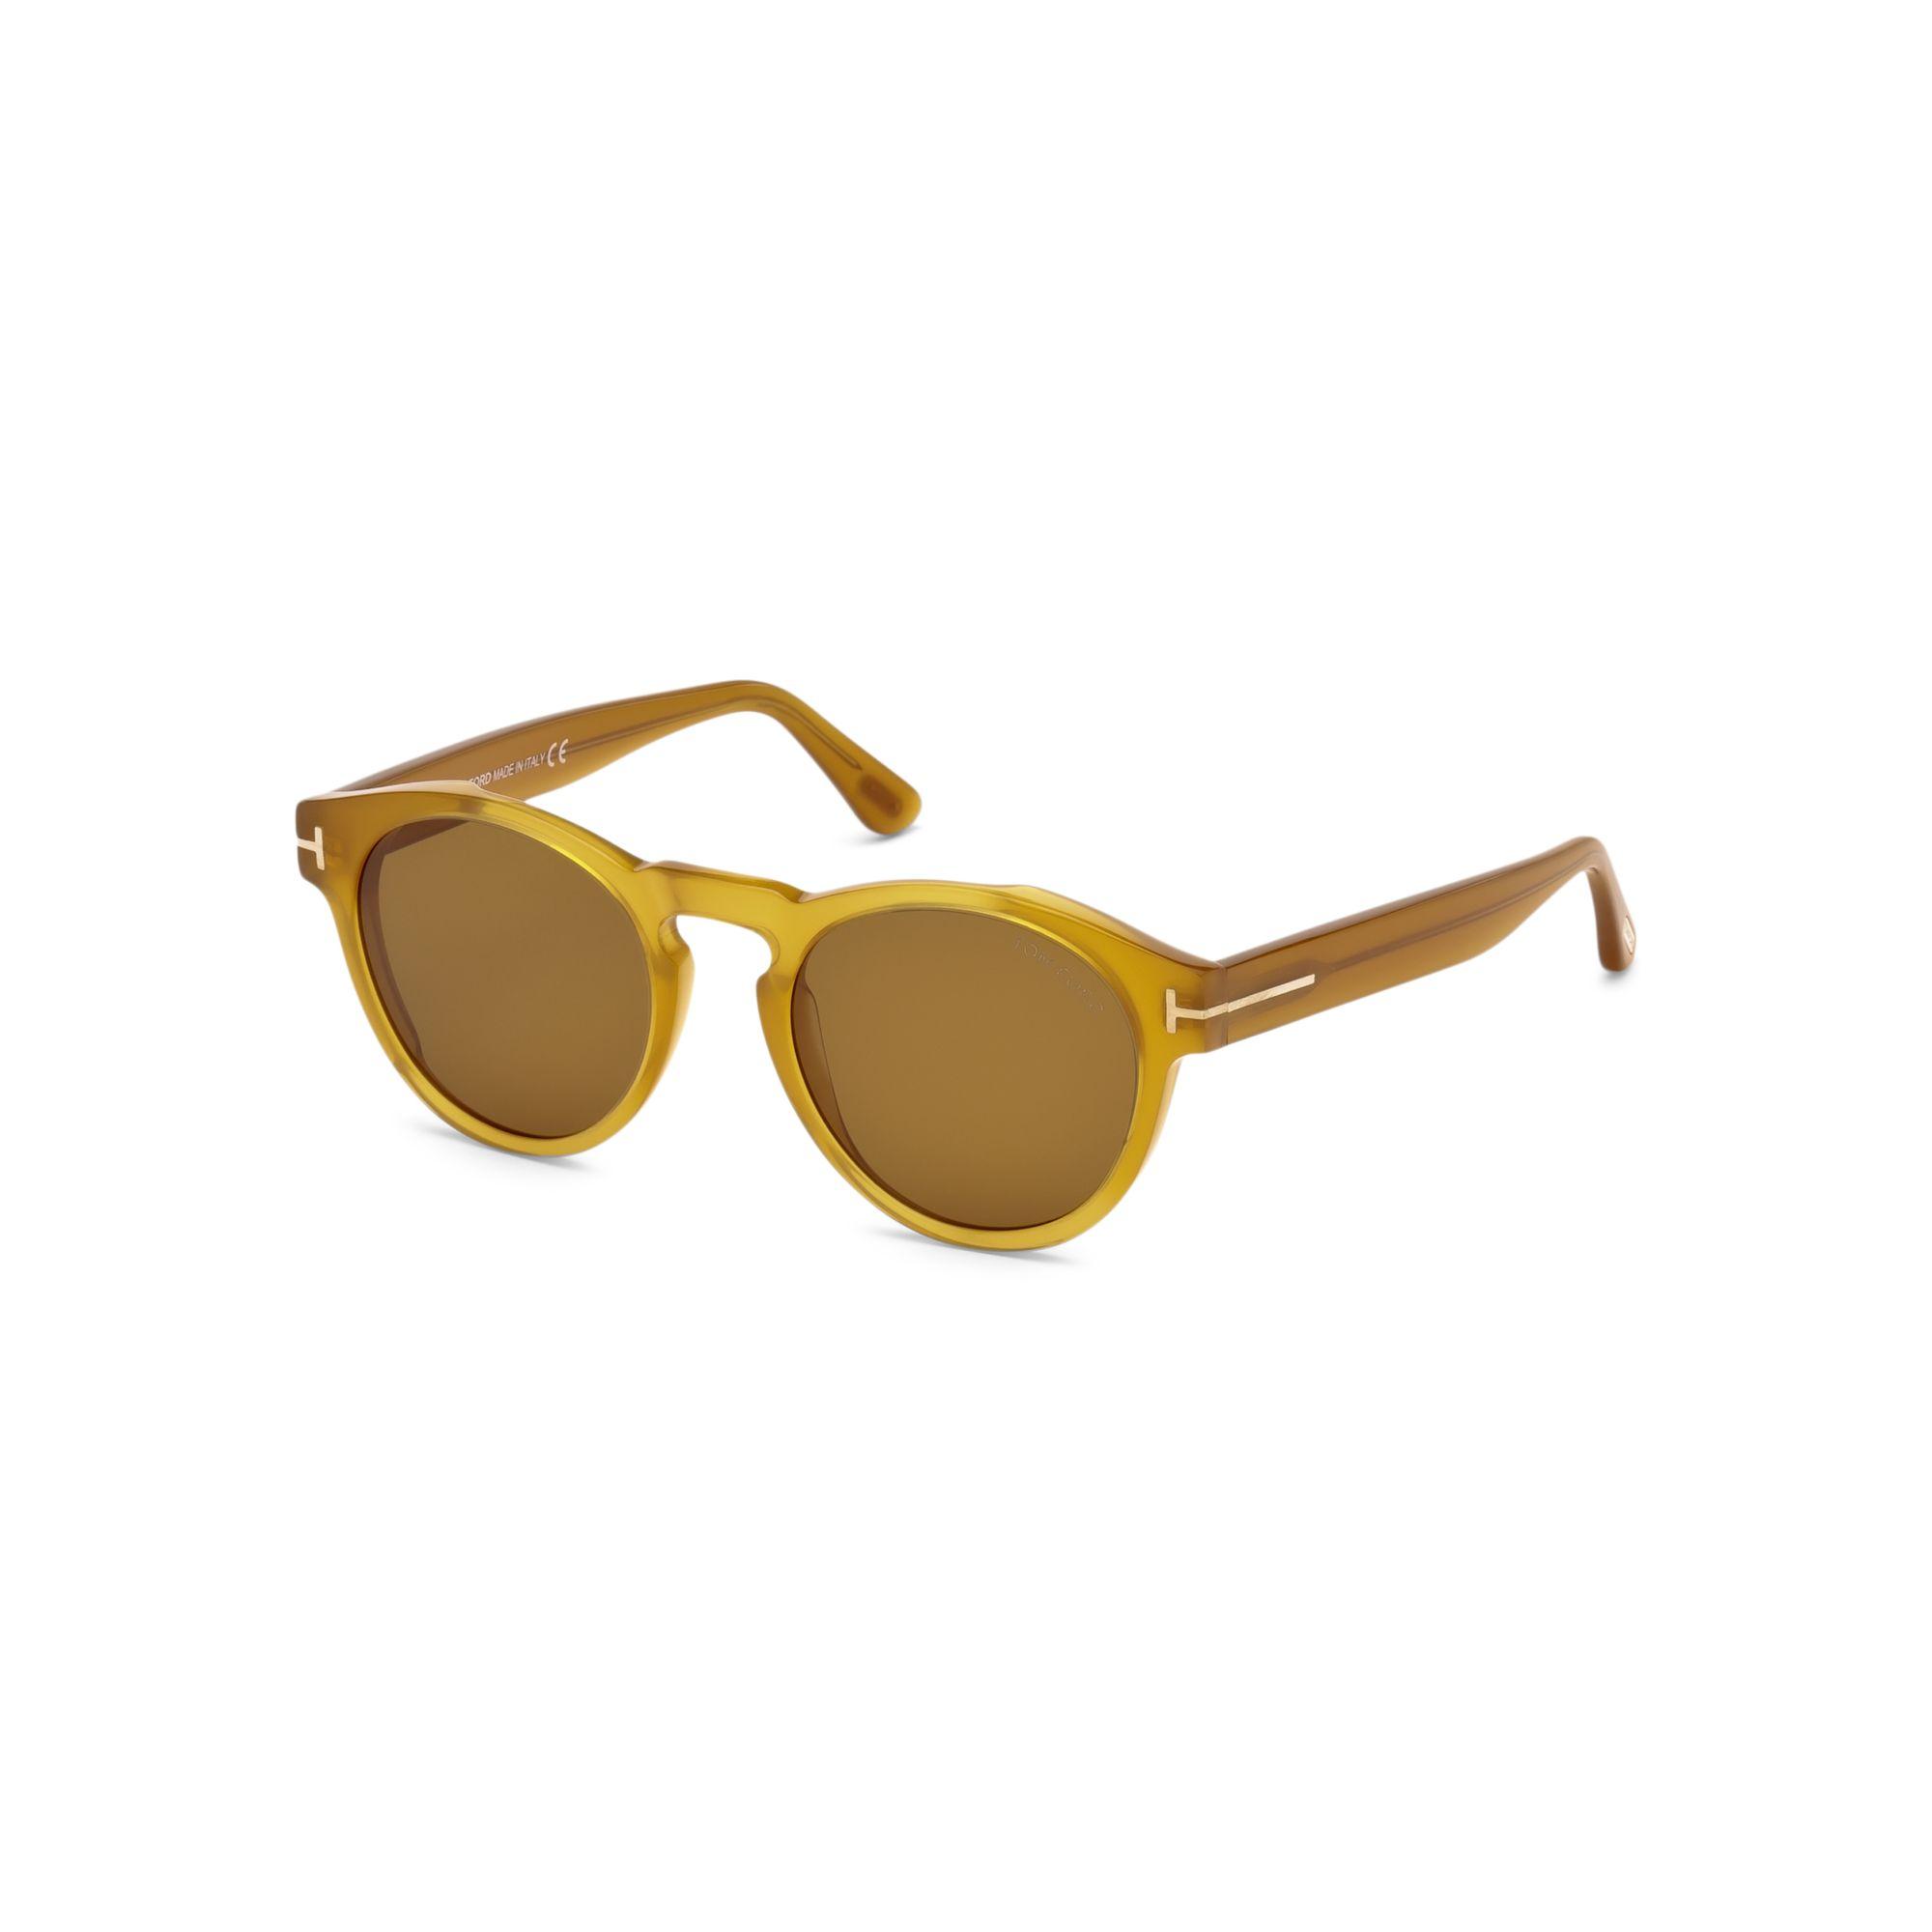 Tom Ford Margaux 50mm Round Sunglasses in Yellow | Lyst